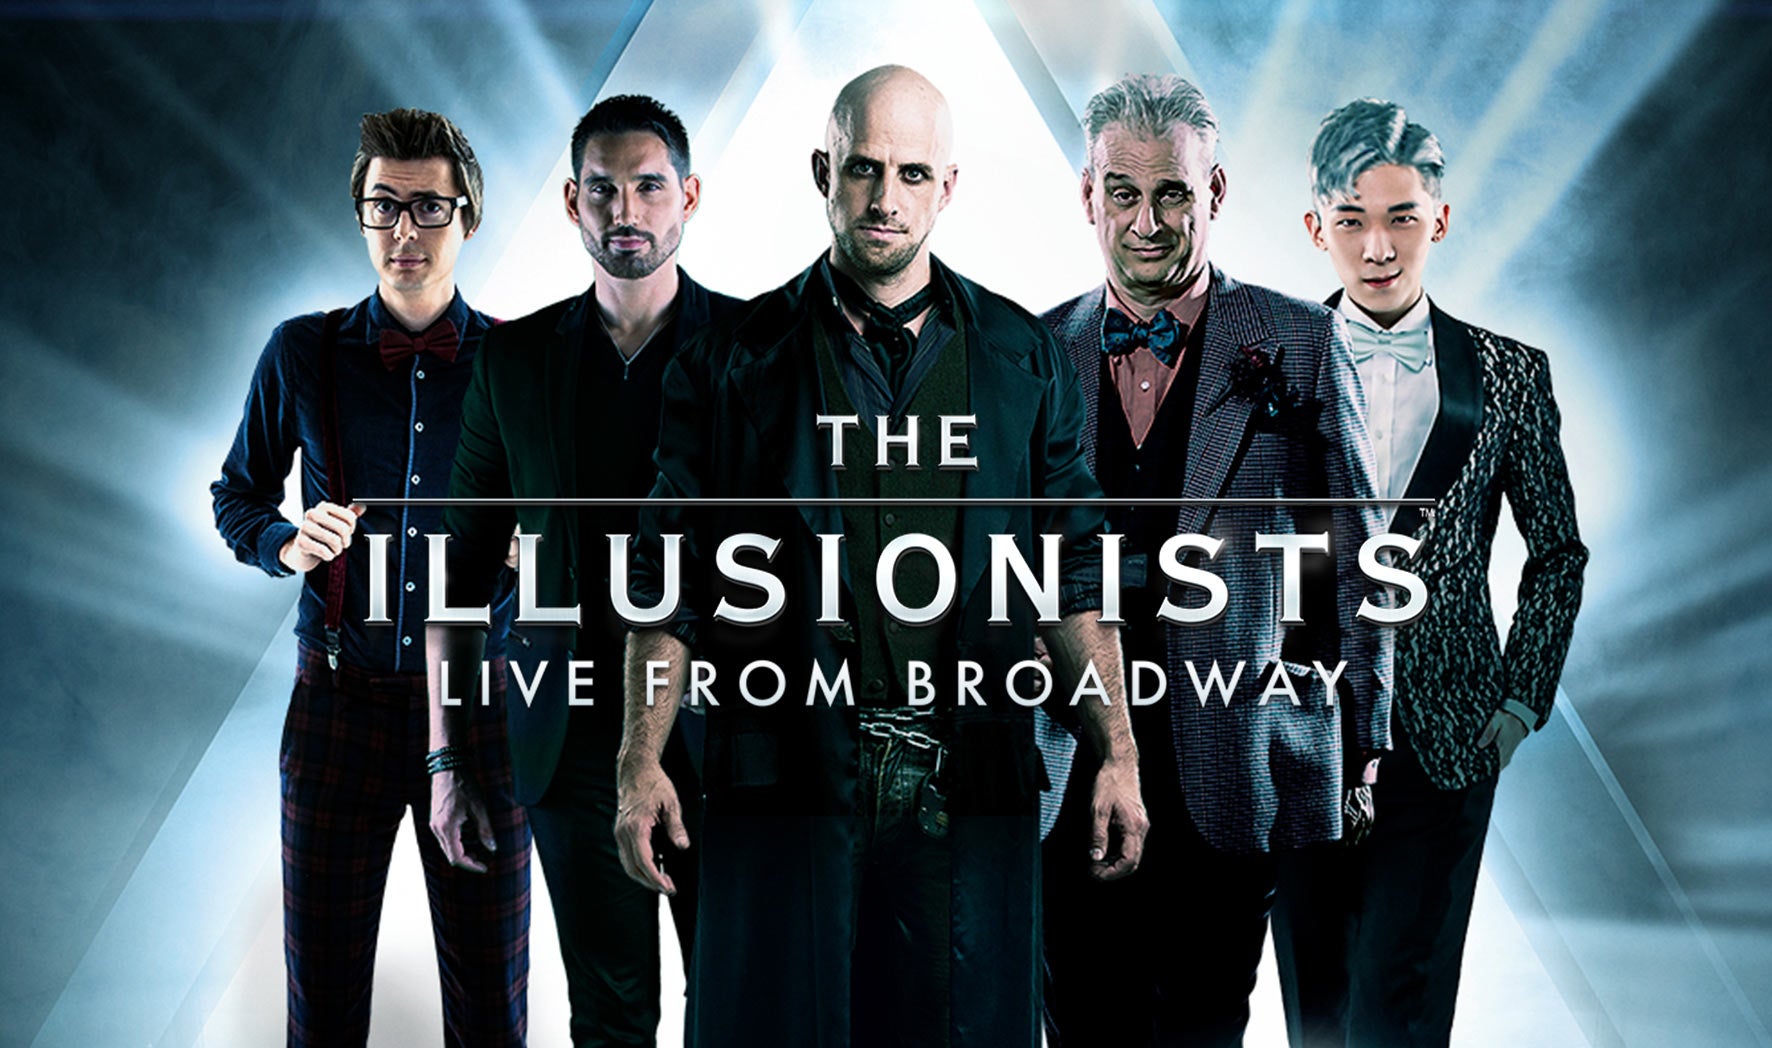 The Illusionists Live from Broadway